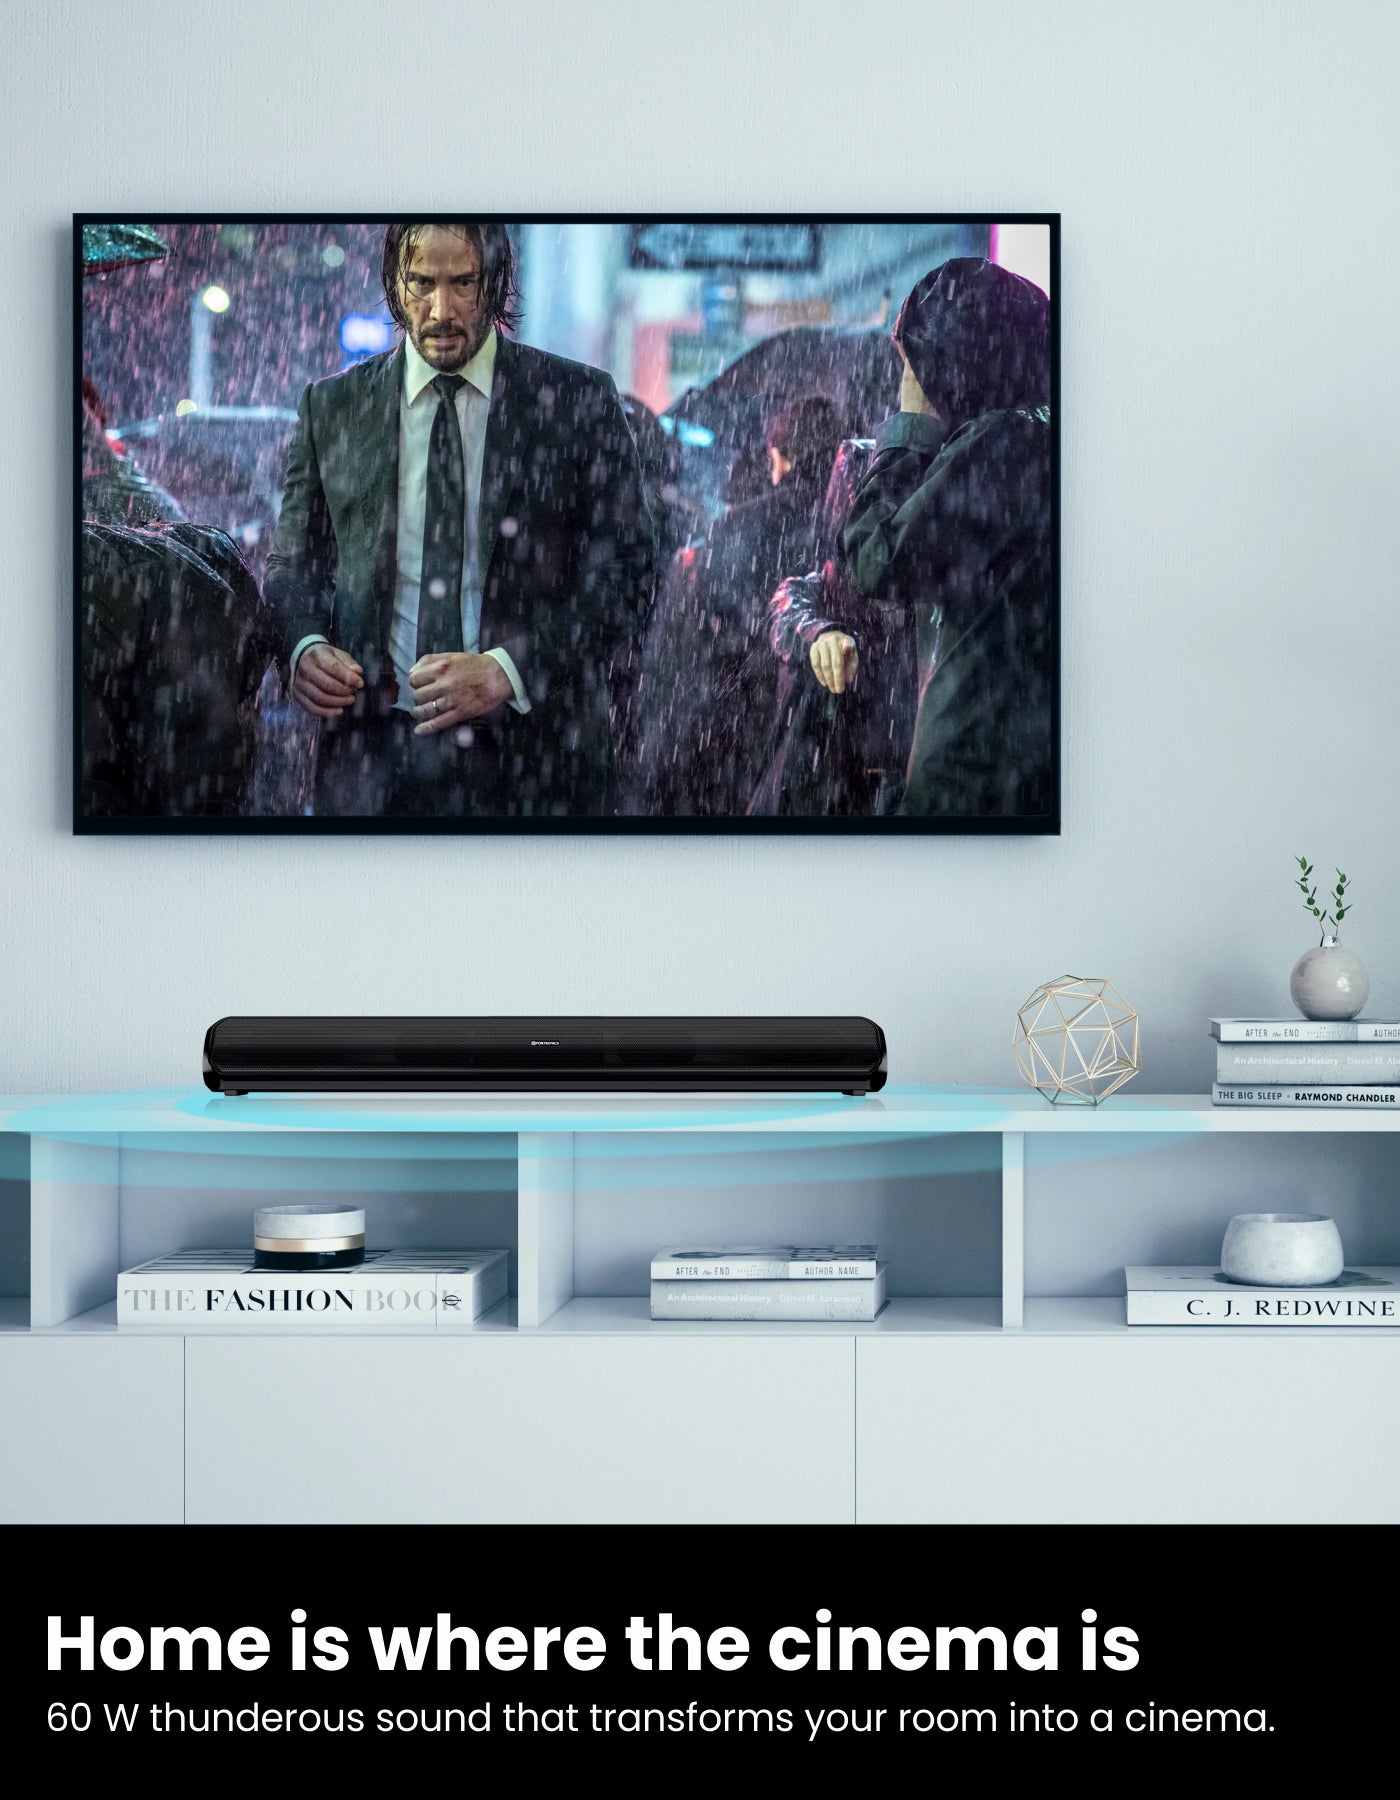 Portronics Sound Slick VI wireless bluetooth speaker Sound bar with all The Right Modes